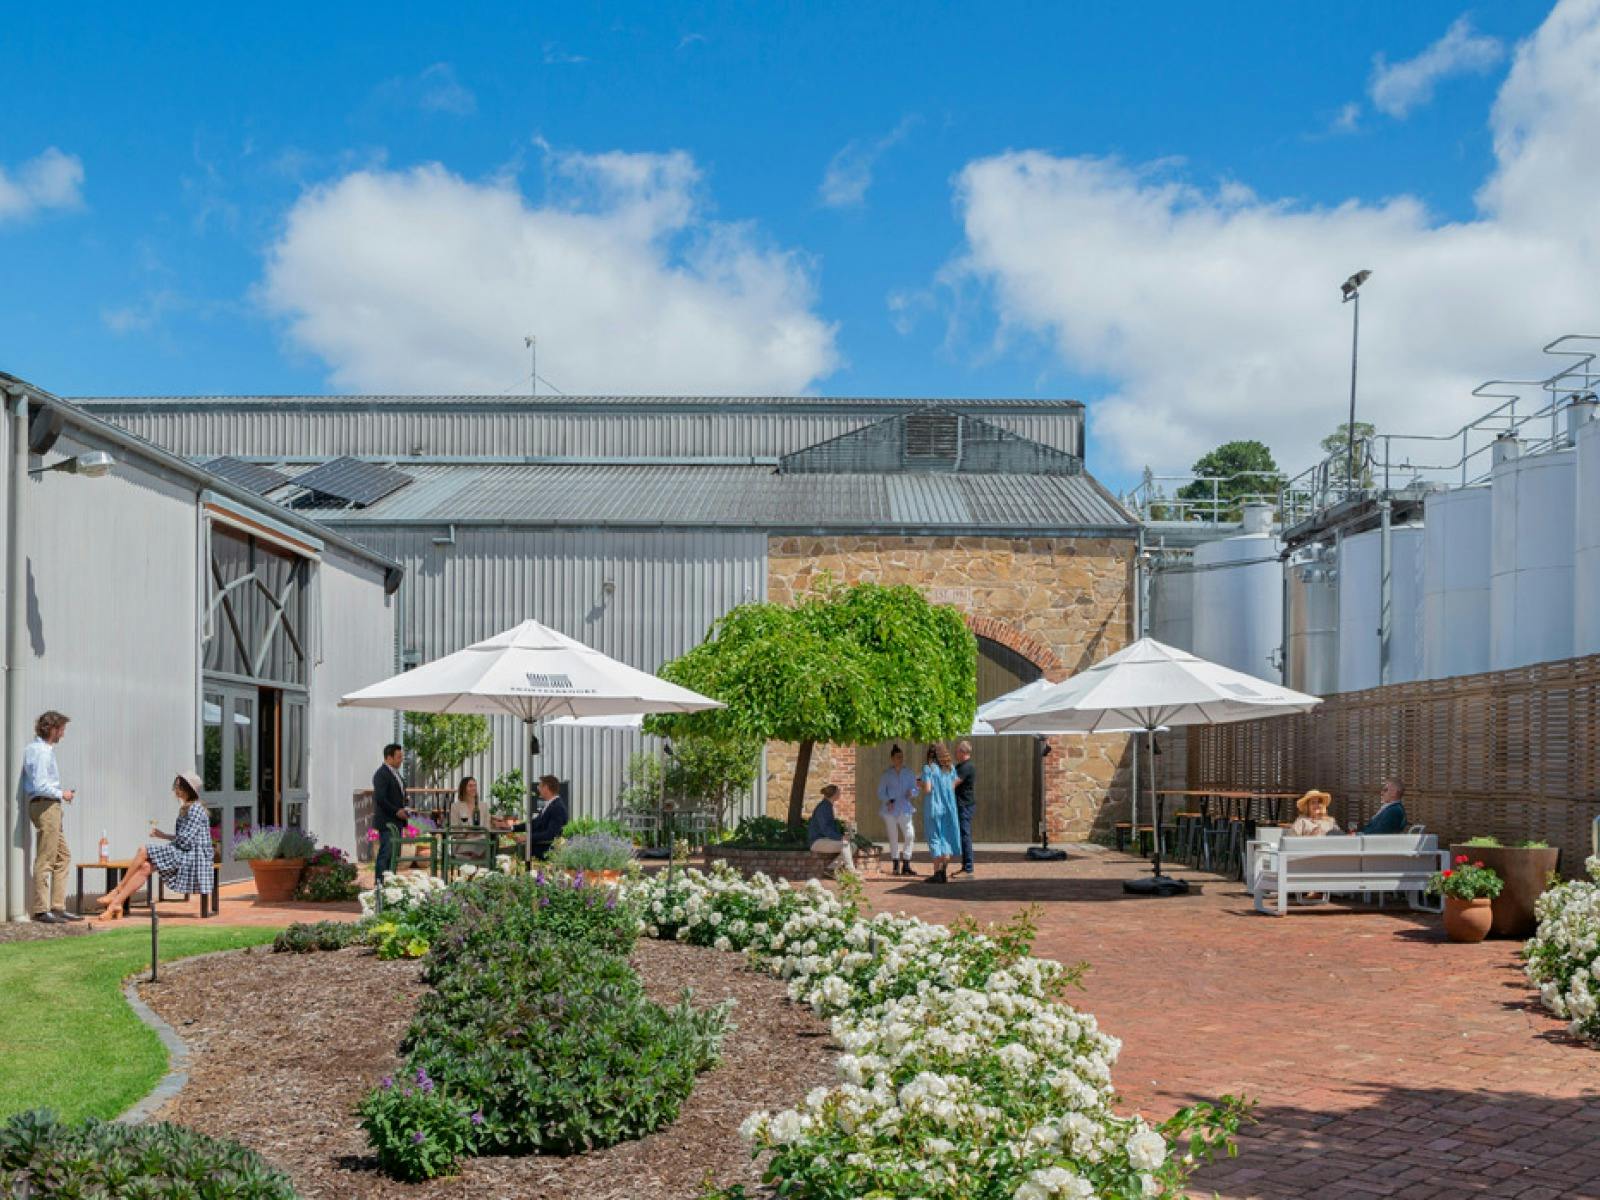 Shottesbrooke's picturesque Cellar Door and winery are located in the one location